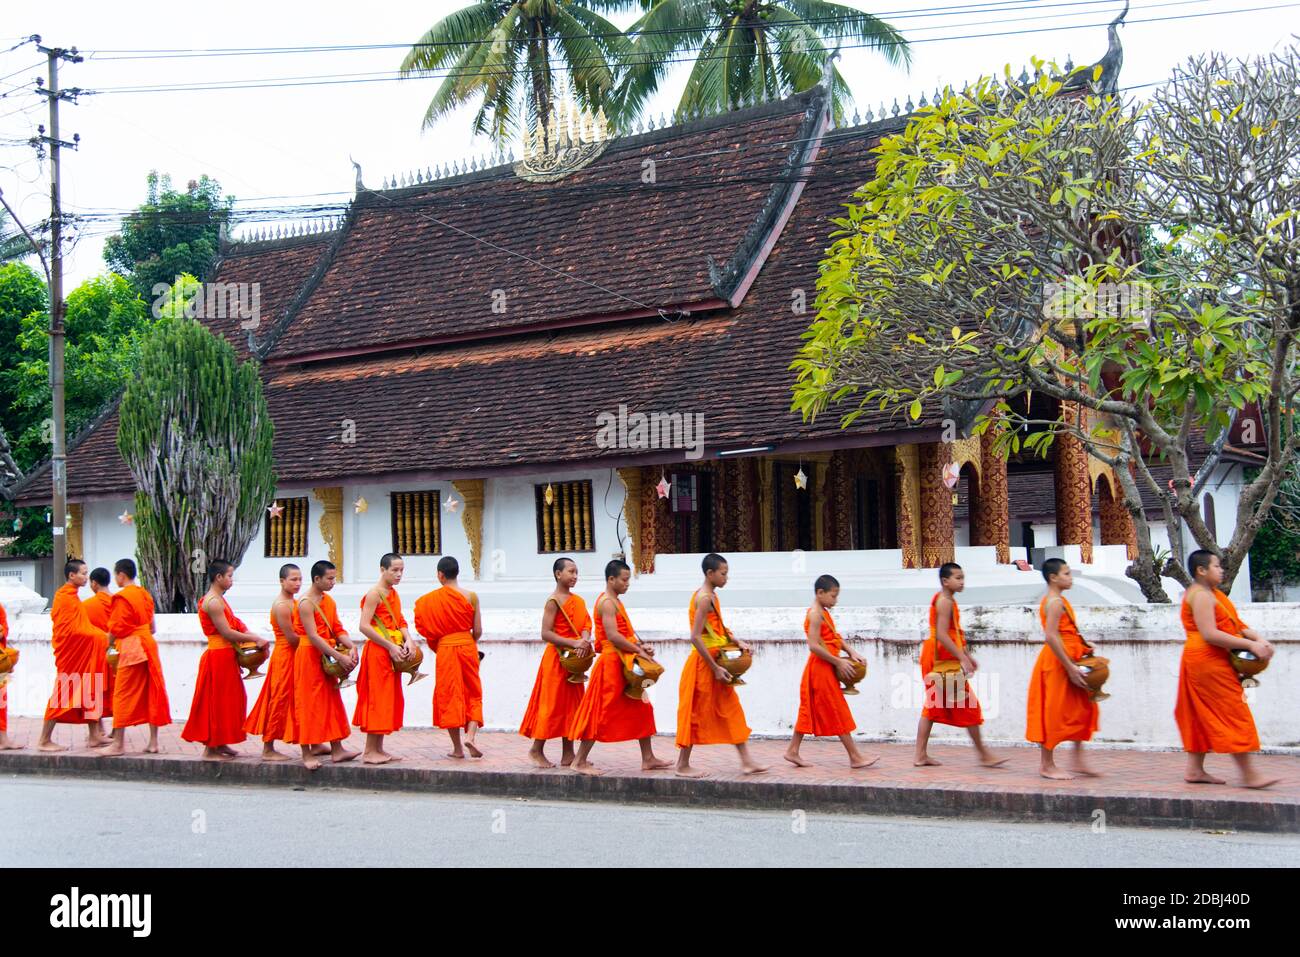 Buddhist monks receive rice from locals during an early morning daily ritual known as Sai Bat (morning alms) in Luang Prabang, Laos Stock Photo